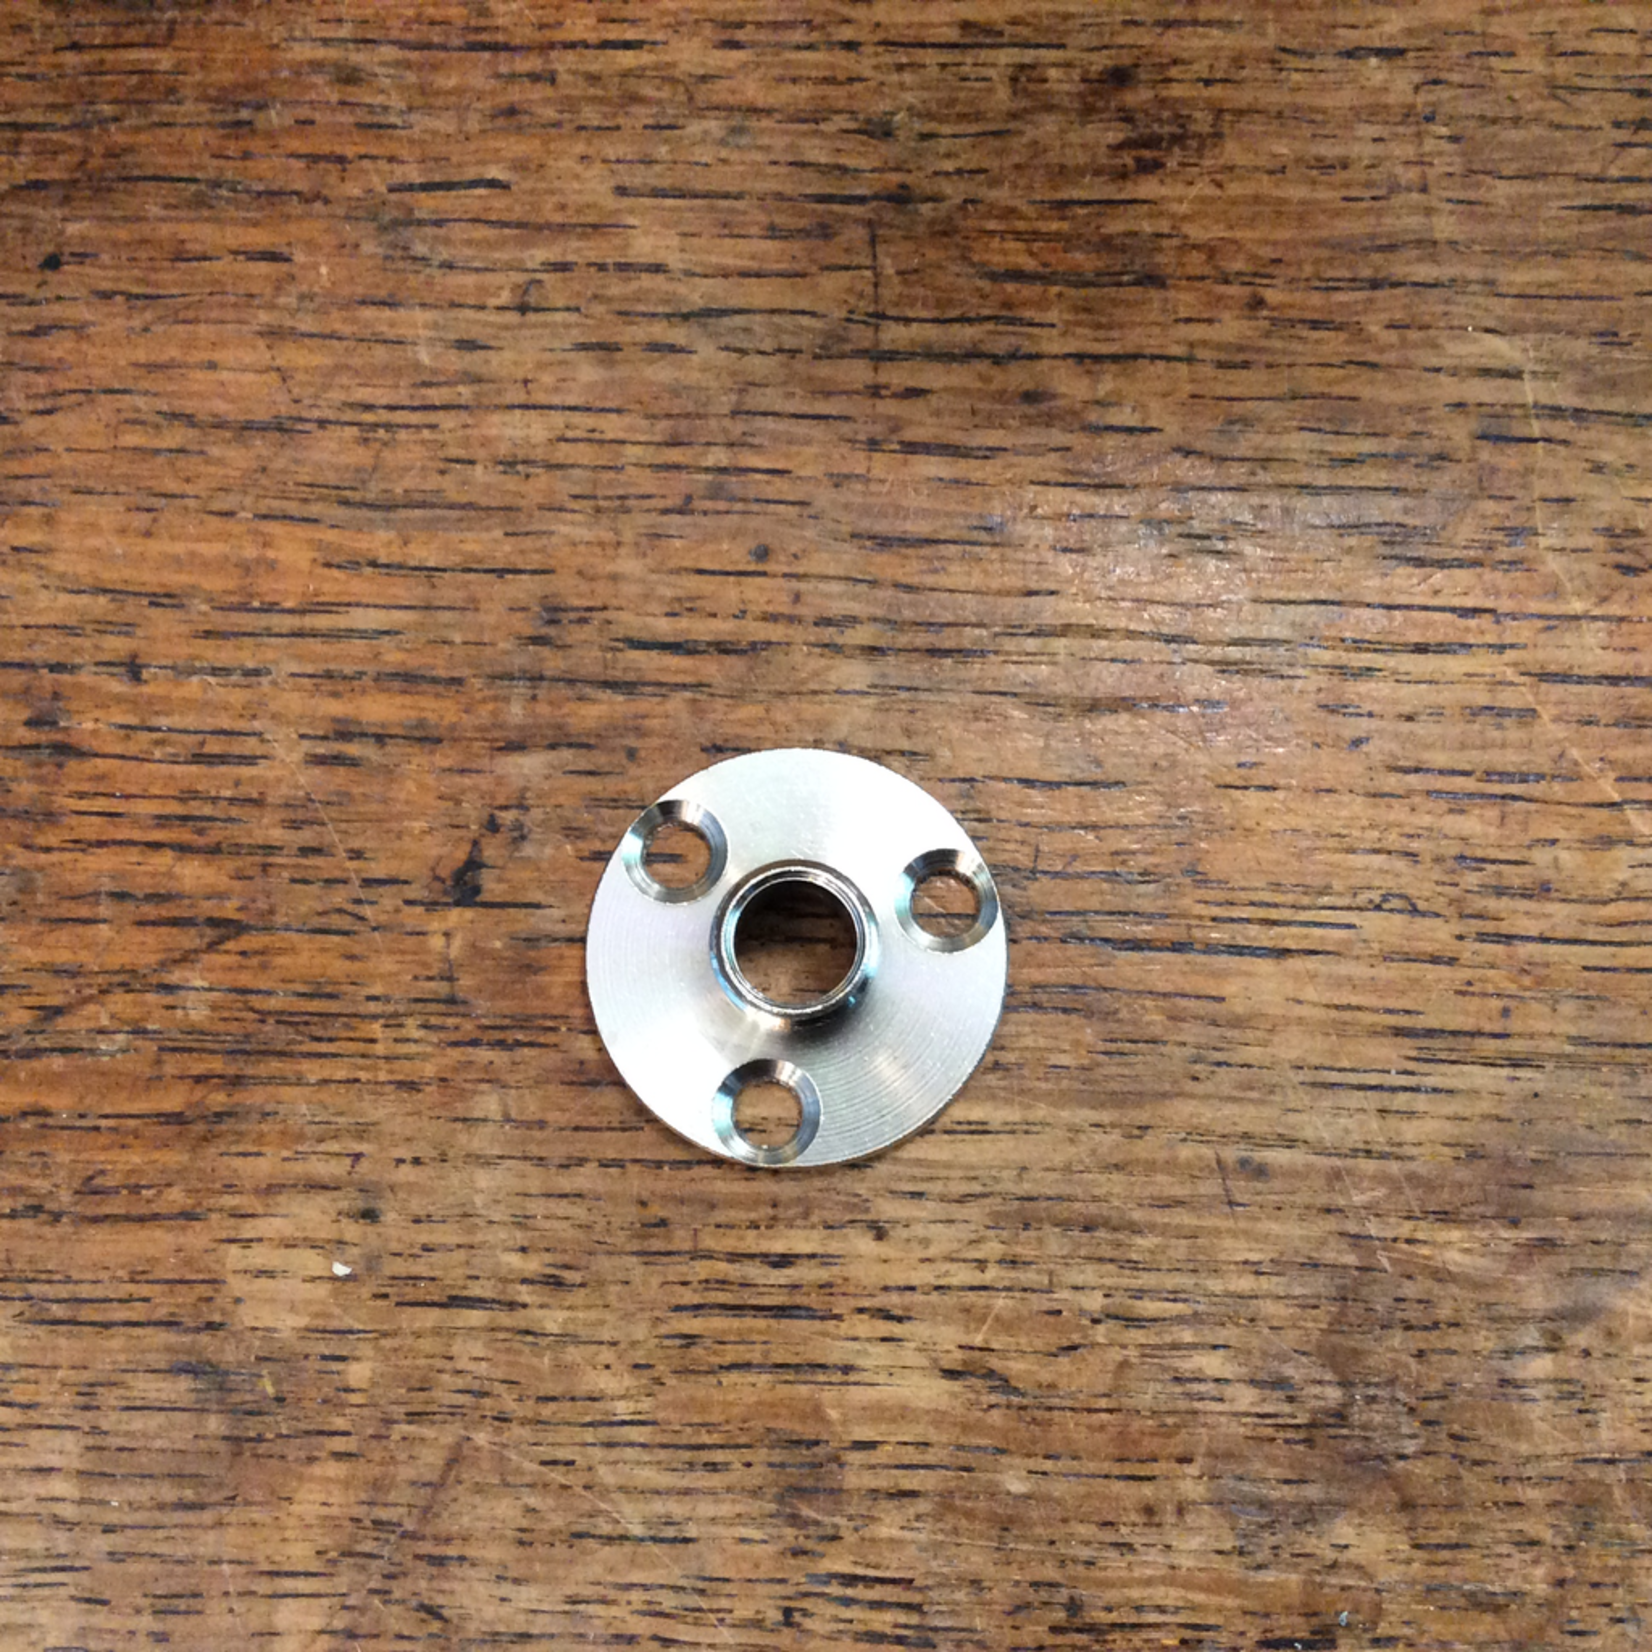 SL British Made COMPONENT Baseplate NICKEL Plated 10mm